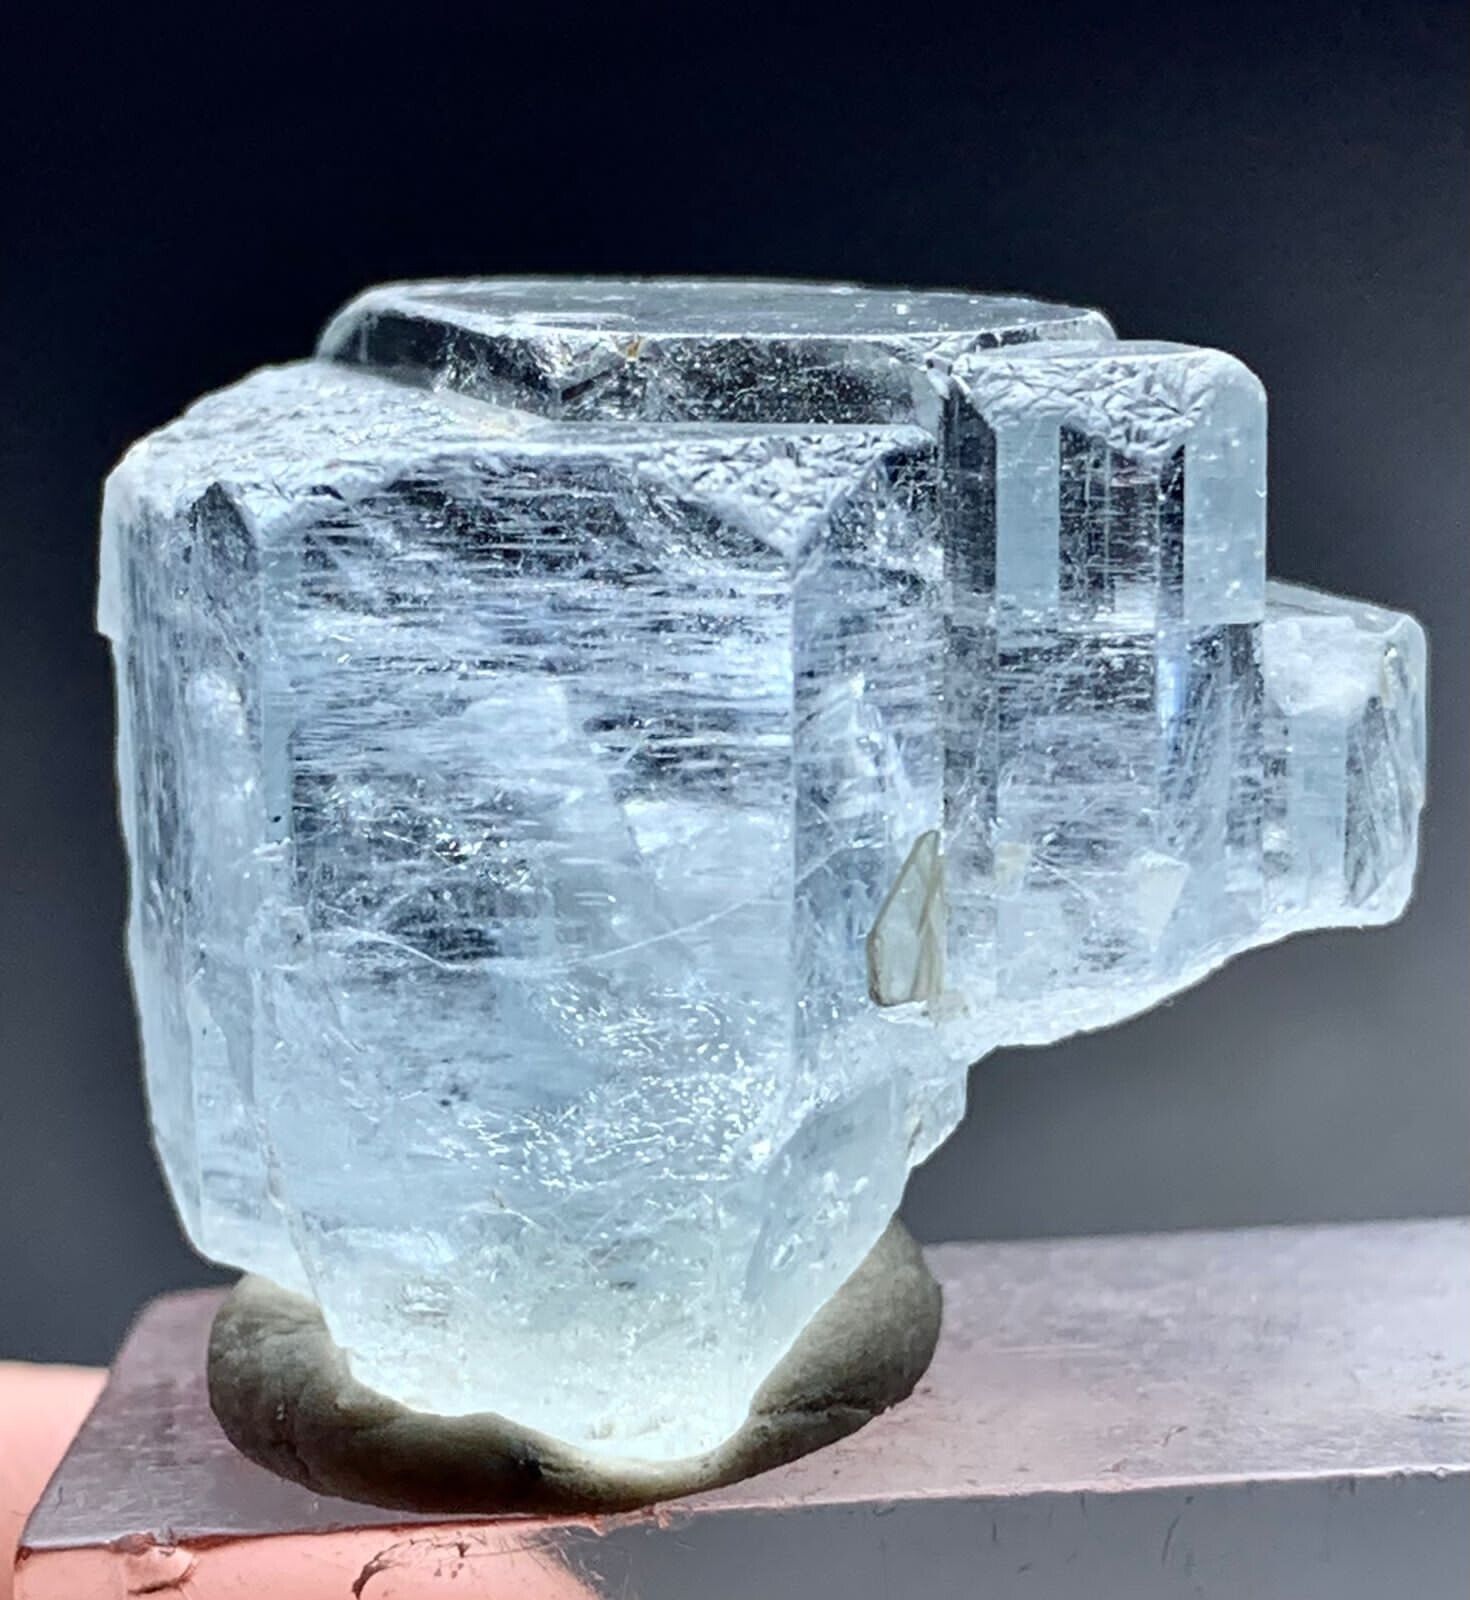 75 CTS Beautiful Aquamarine Crystals Bunch From Pakistan